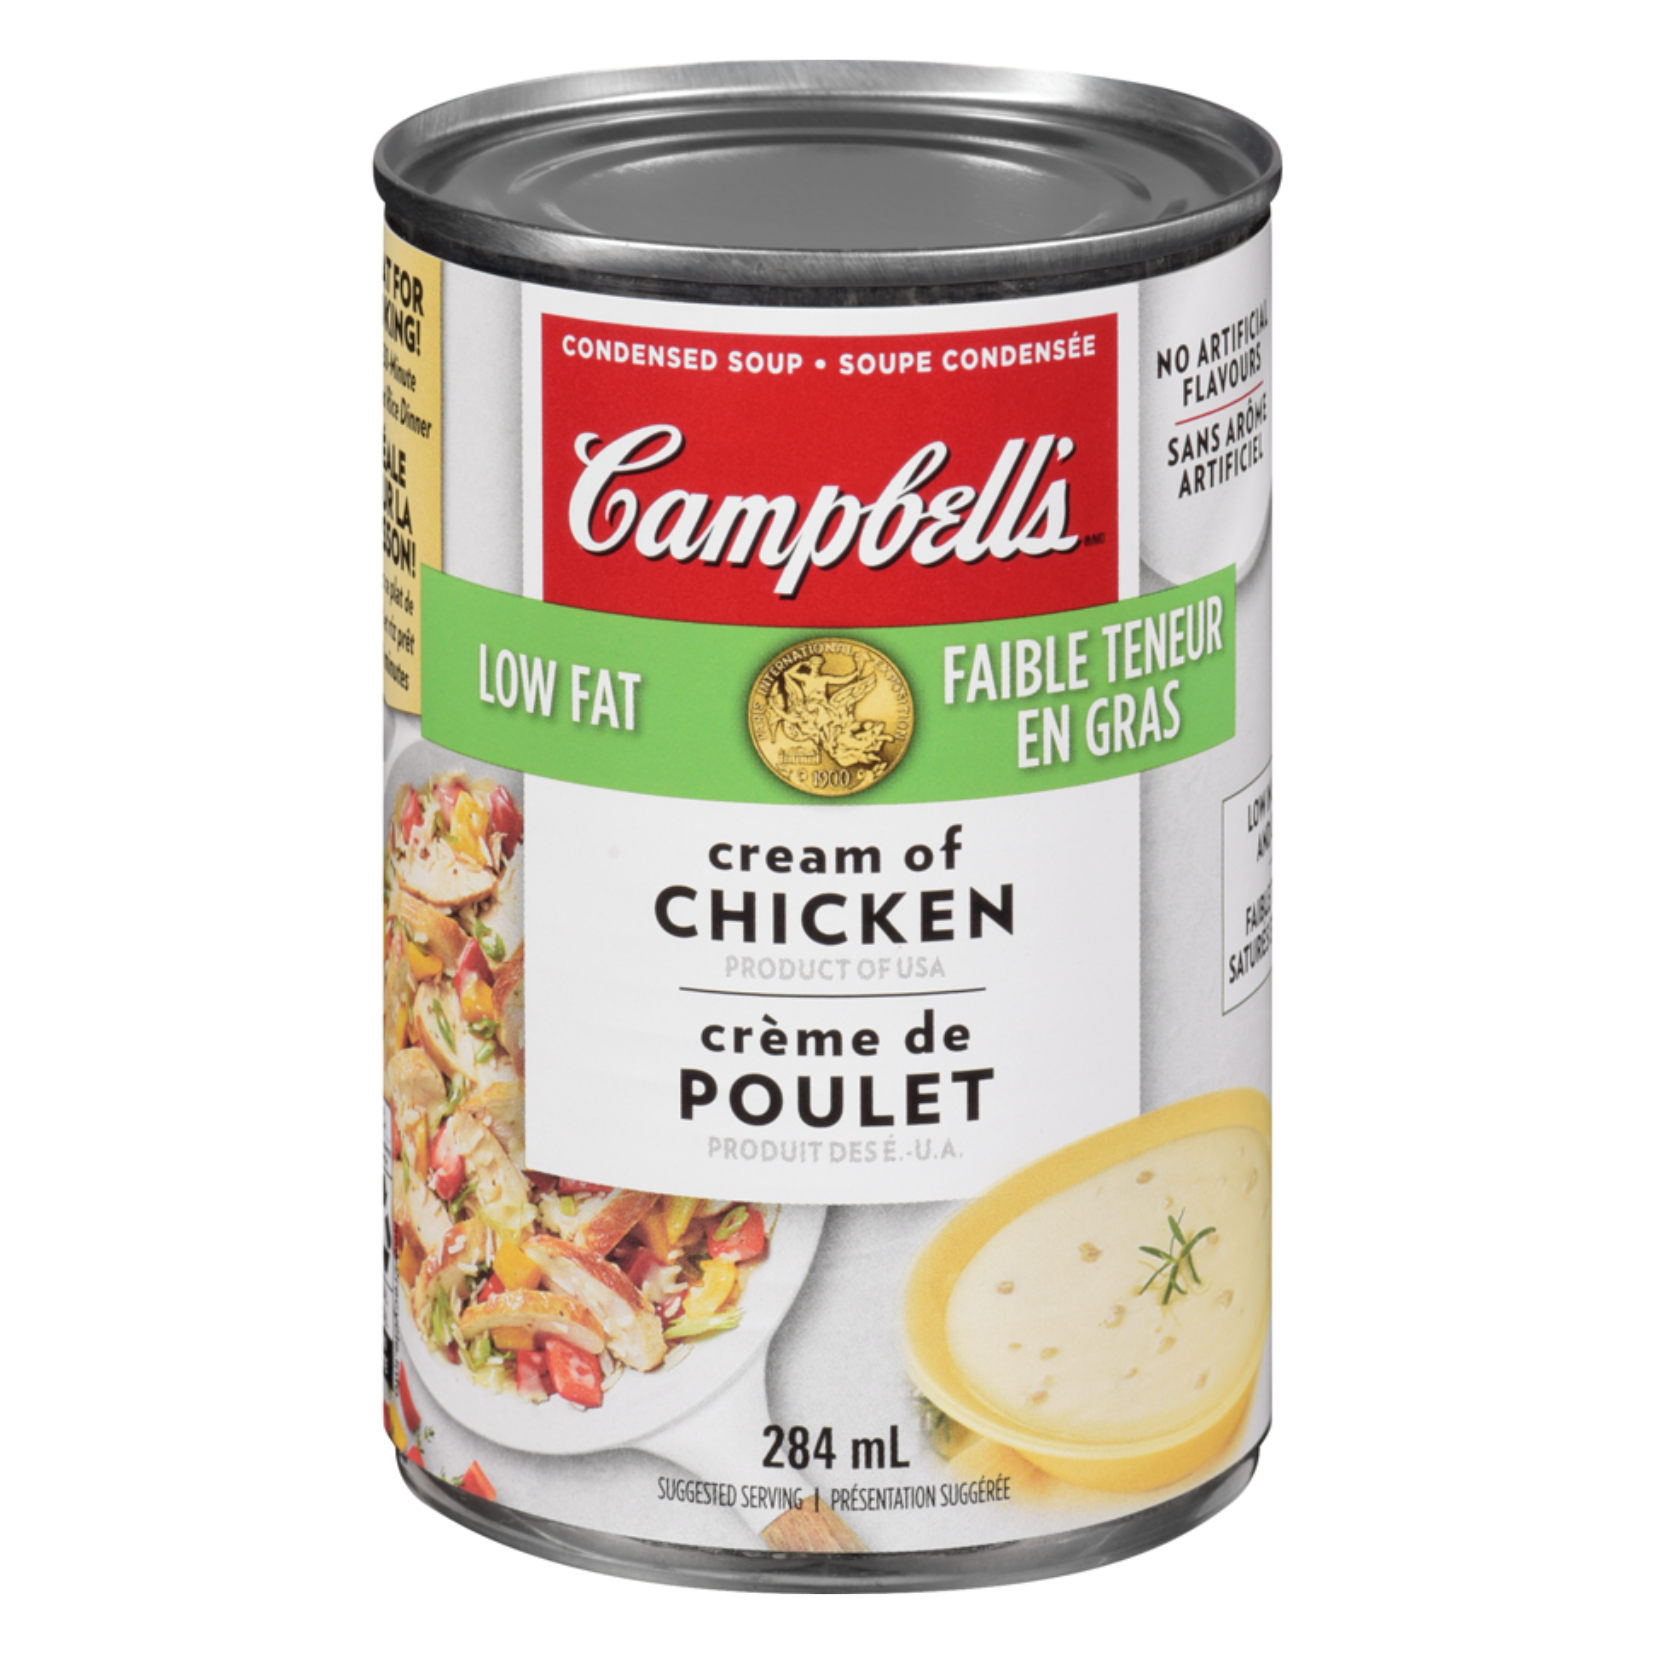 Campbell's Low Fat Cream of Chicken Soup 284ml